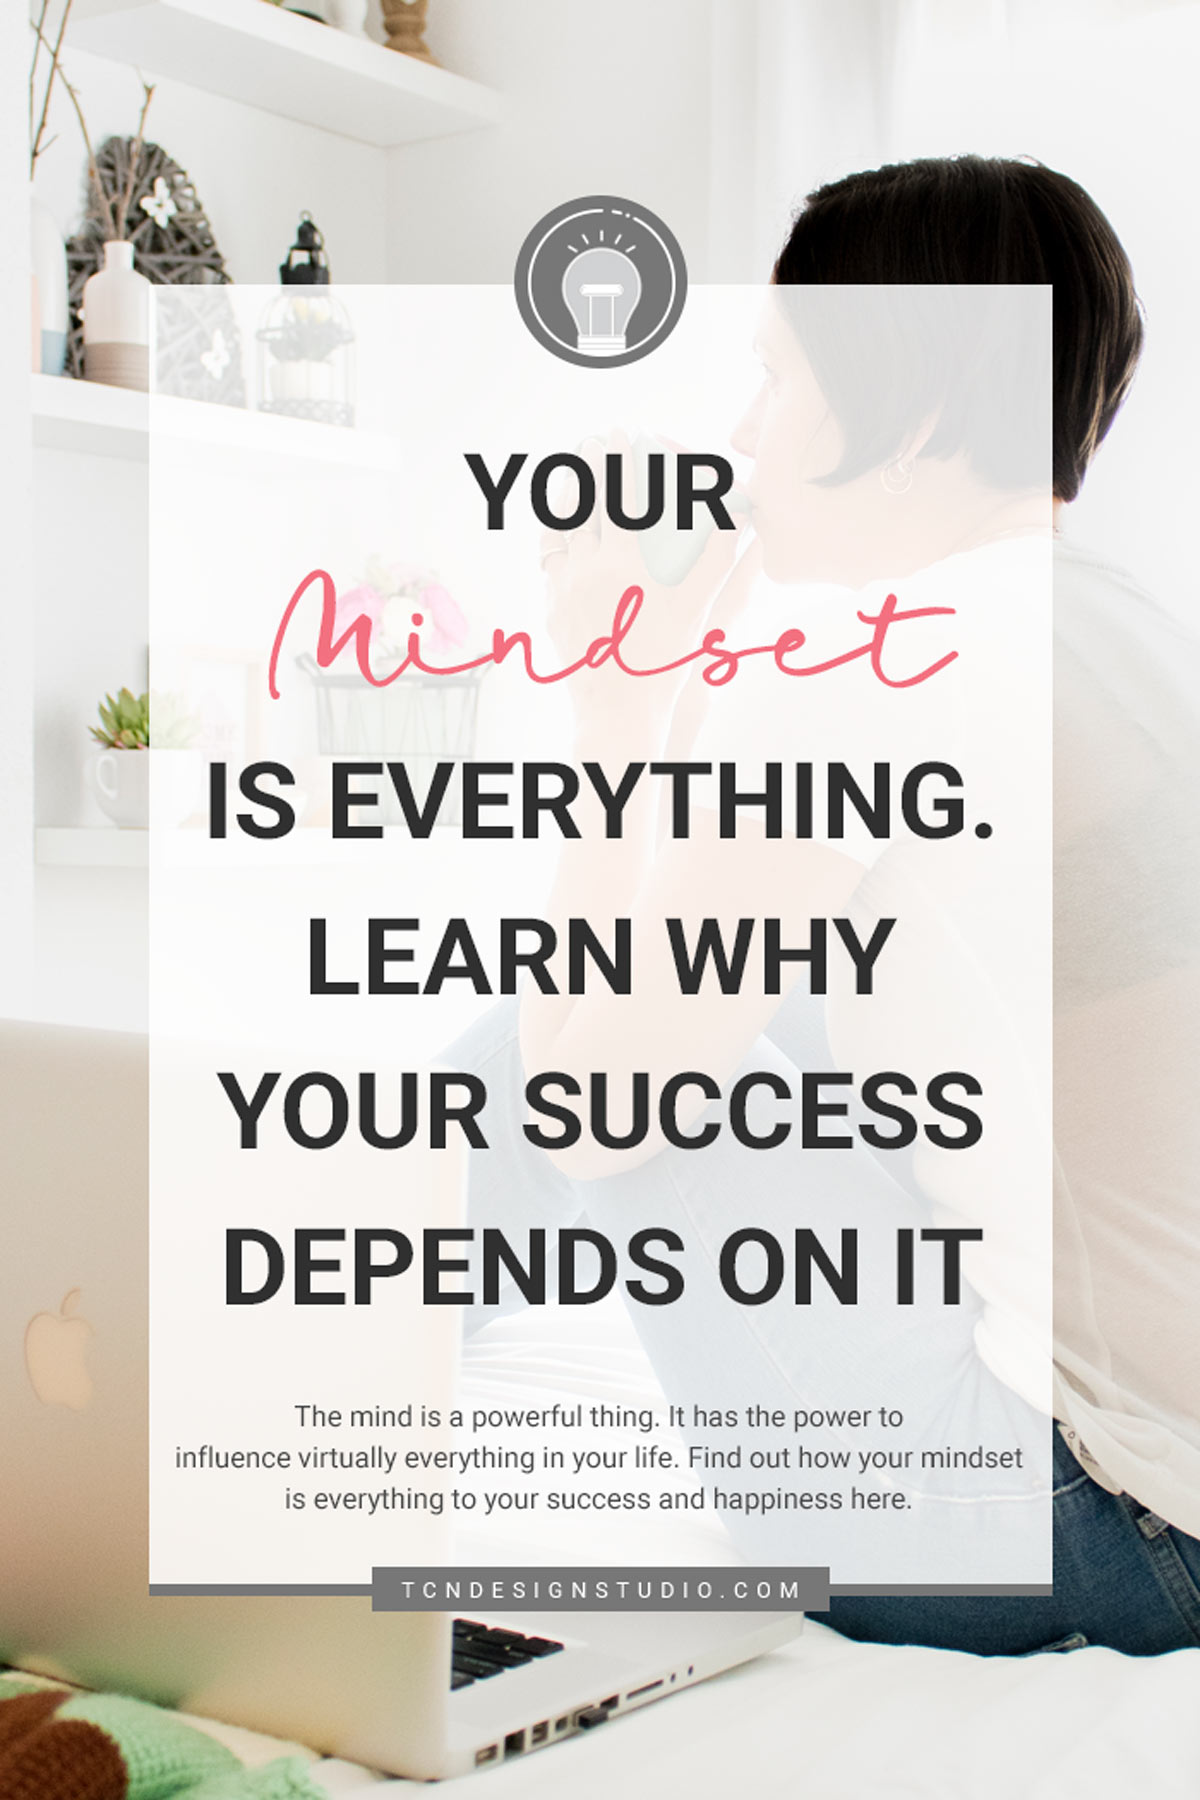 Your Mindset is Everything. Learn Why Your Success Depends on it Cover Image with text overlay